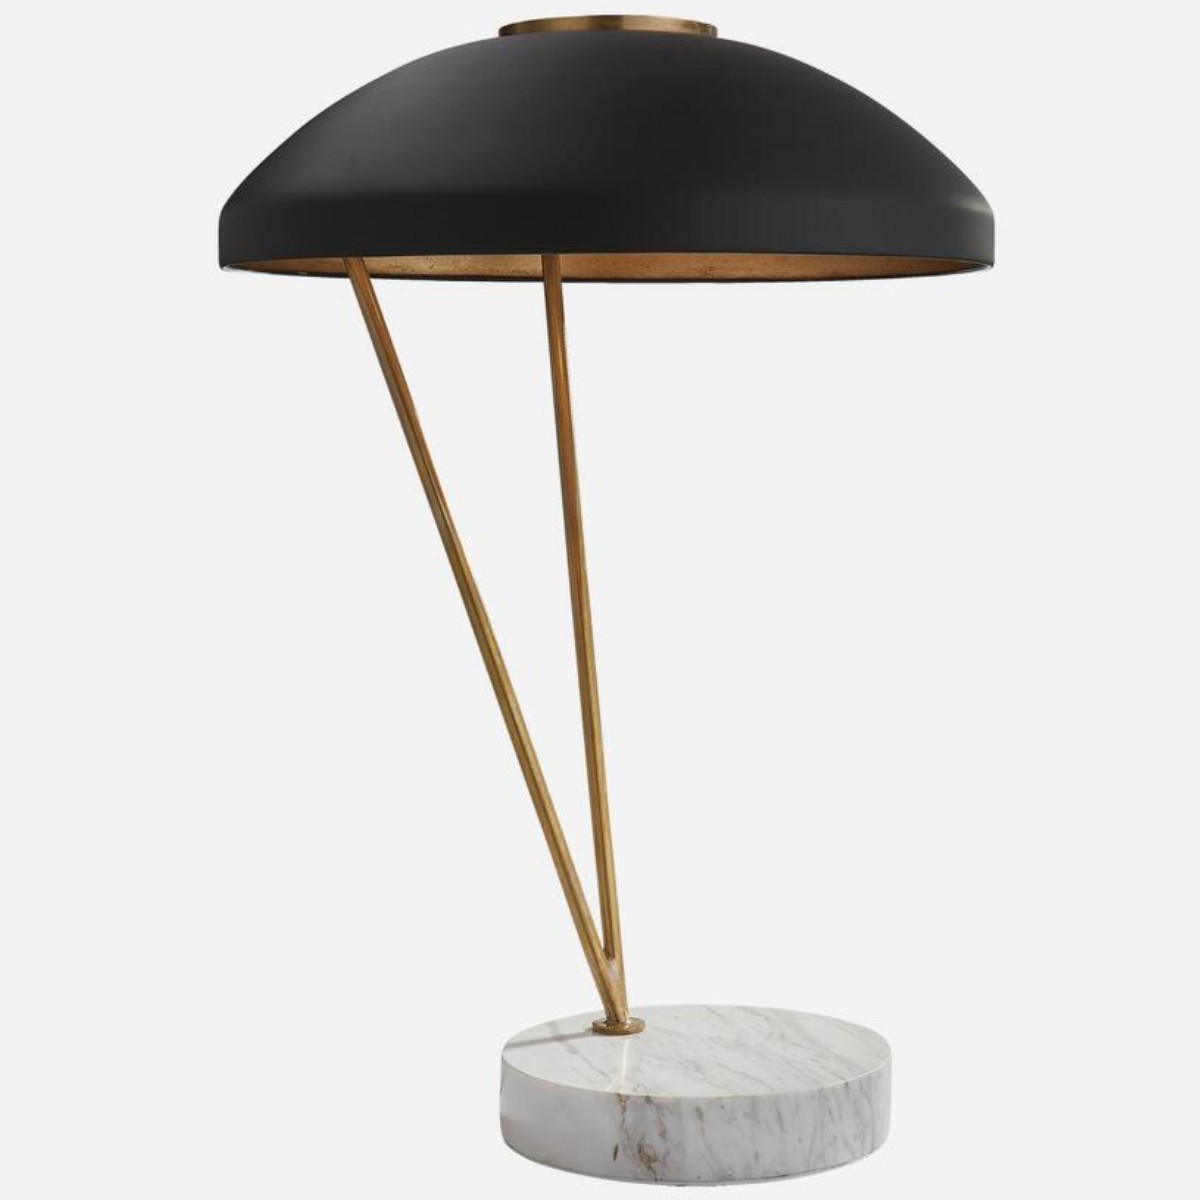 Kelly Wearstler | Coquette Table Lamp | Antique Burnished Brass with White Marble Base